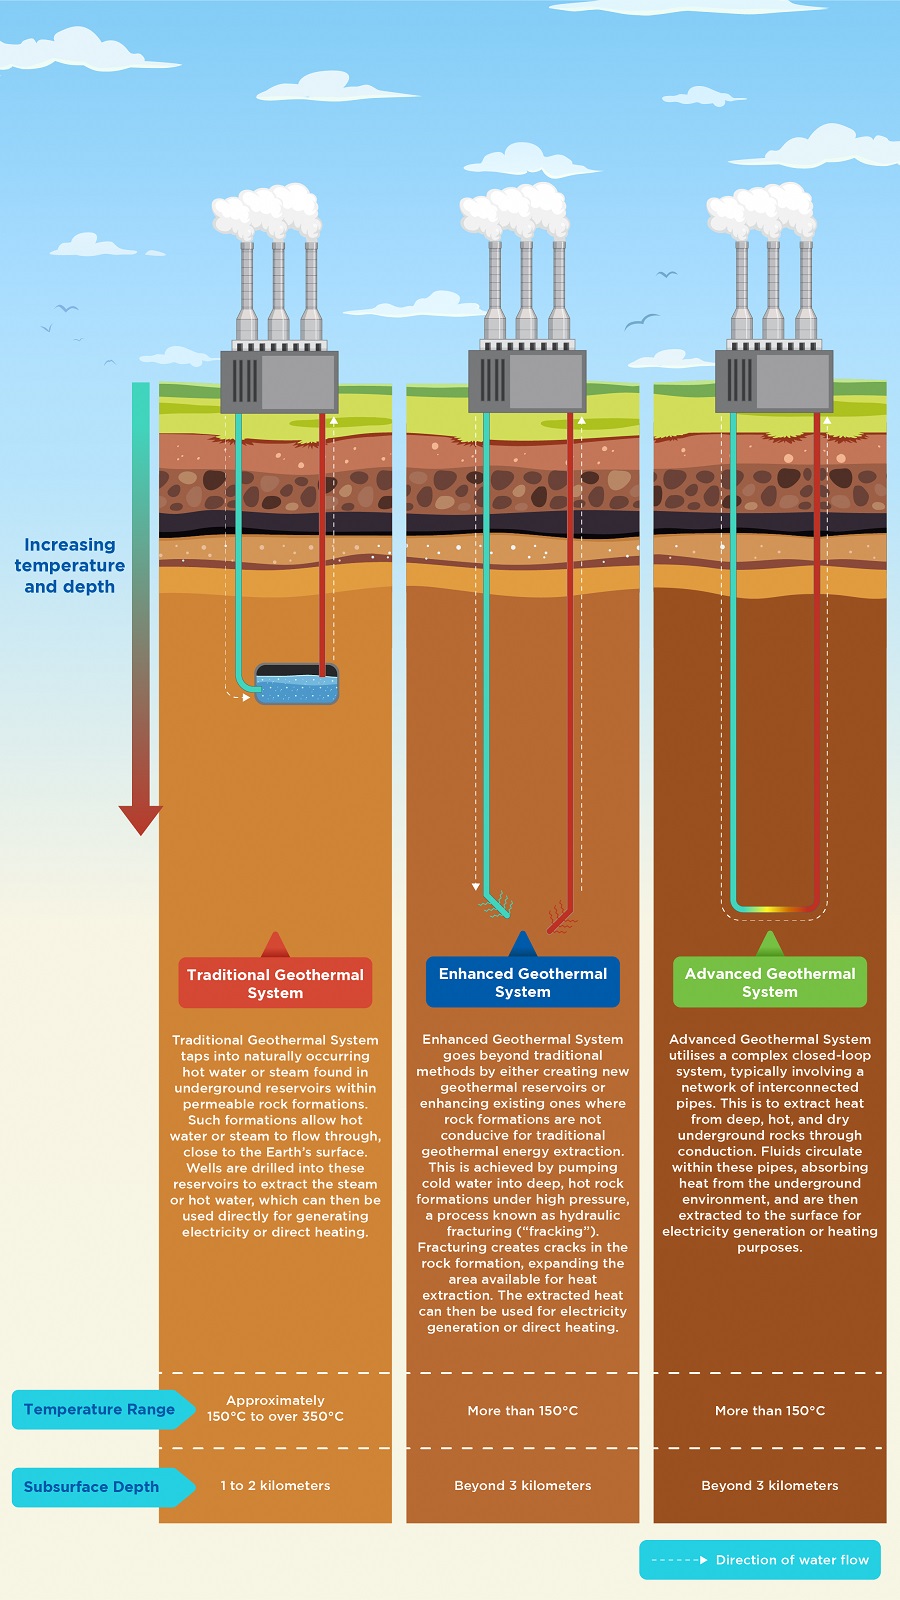 Shows the characteristics of different geothermal systems